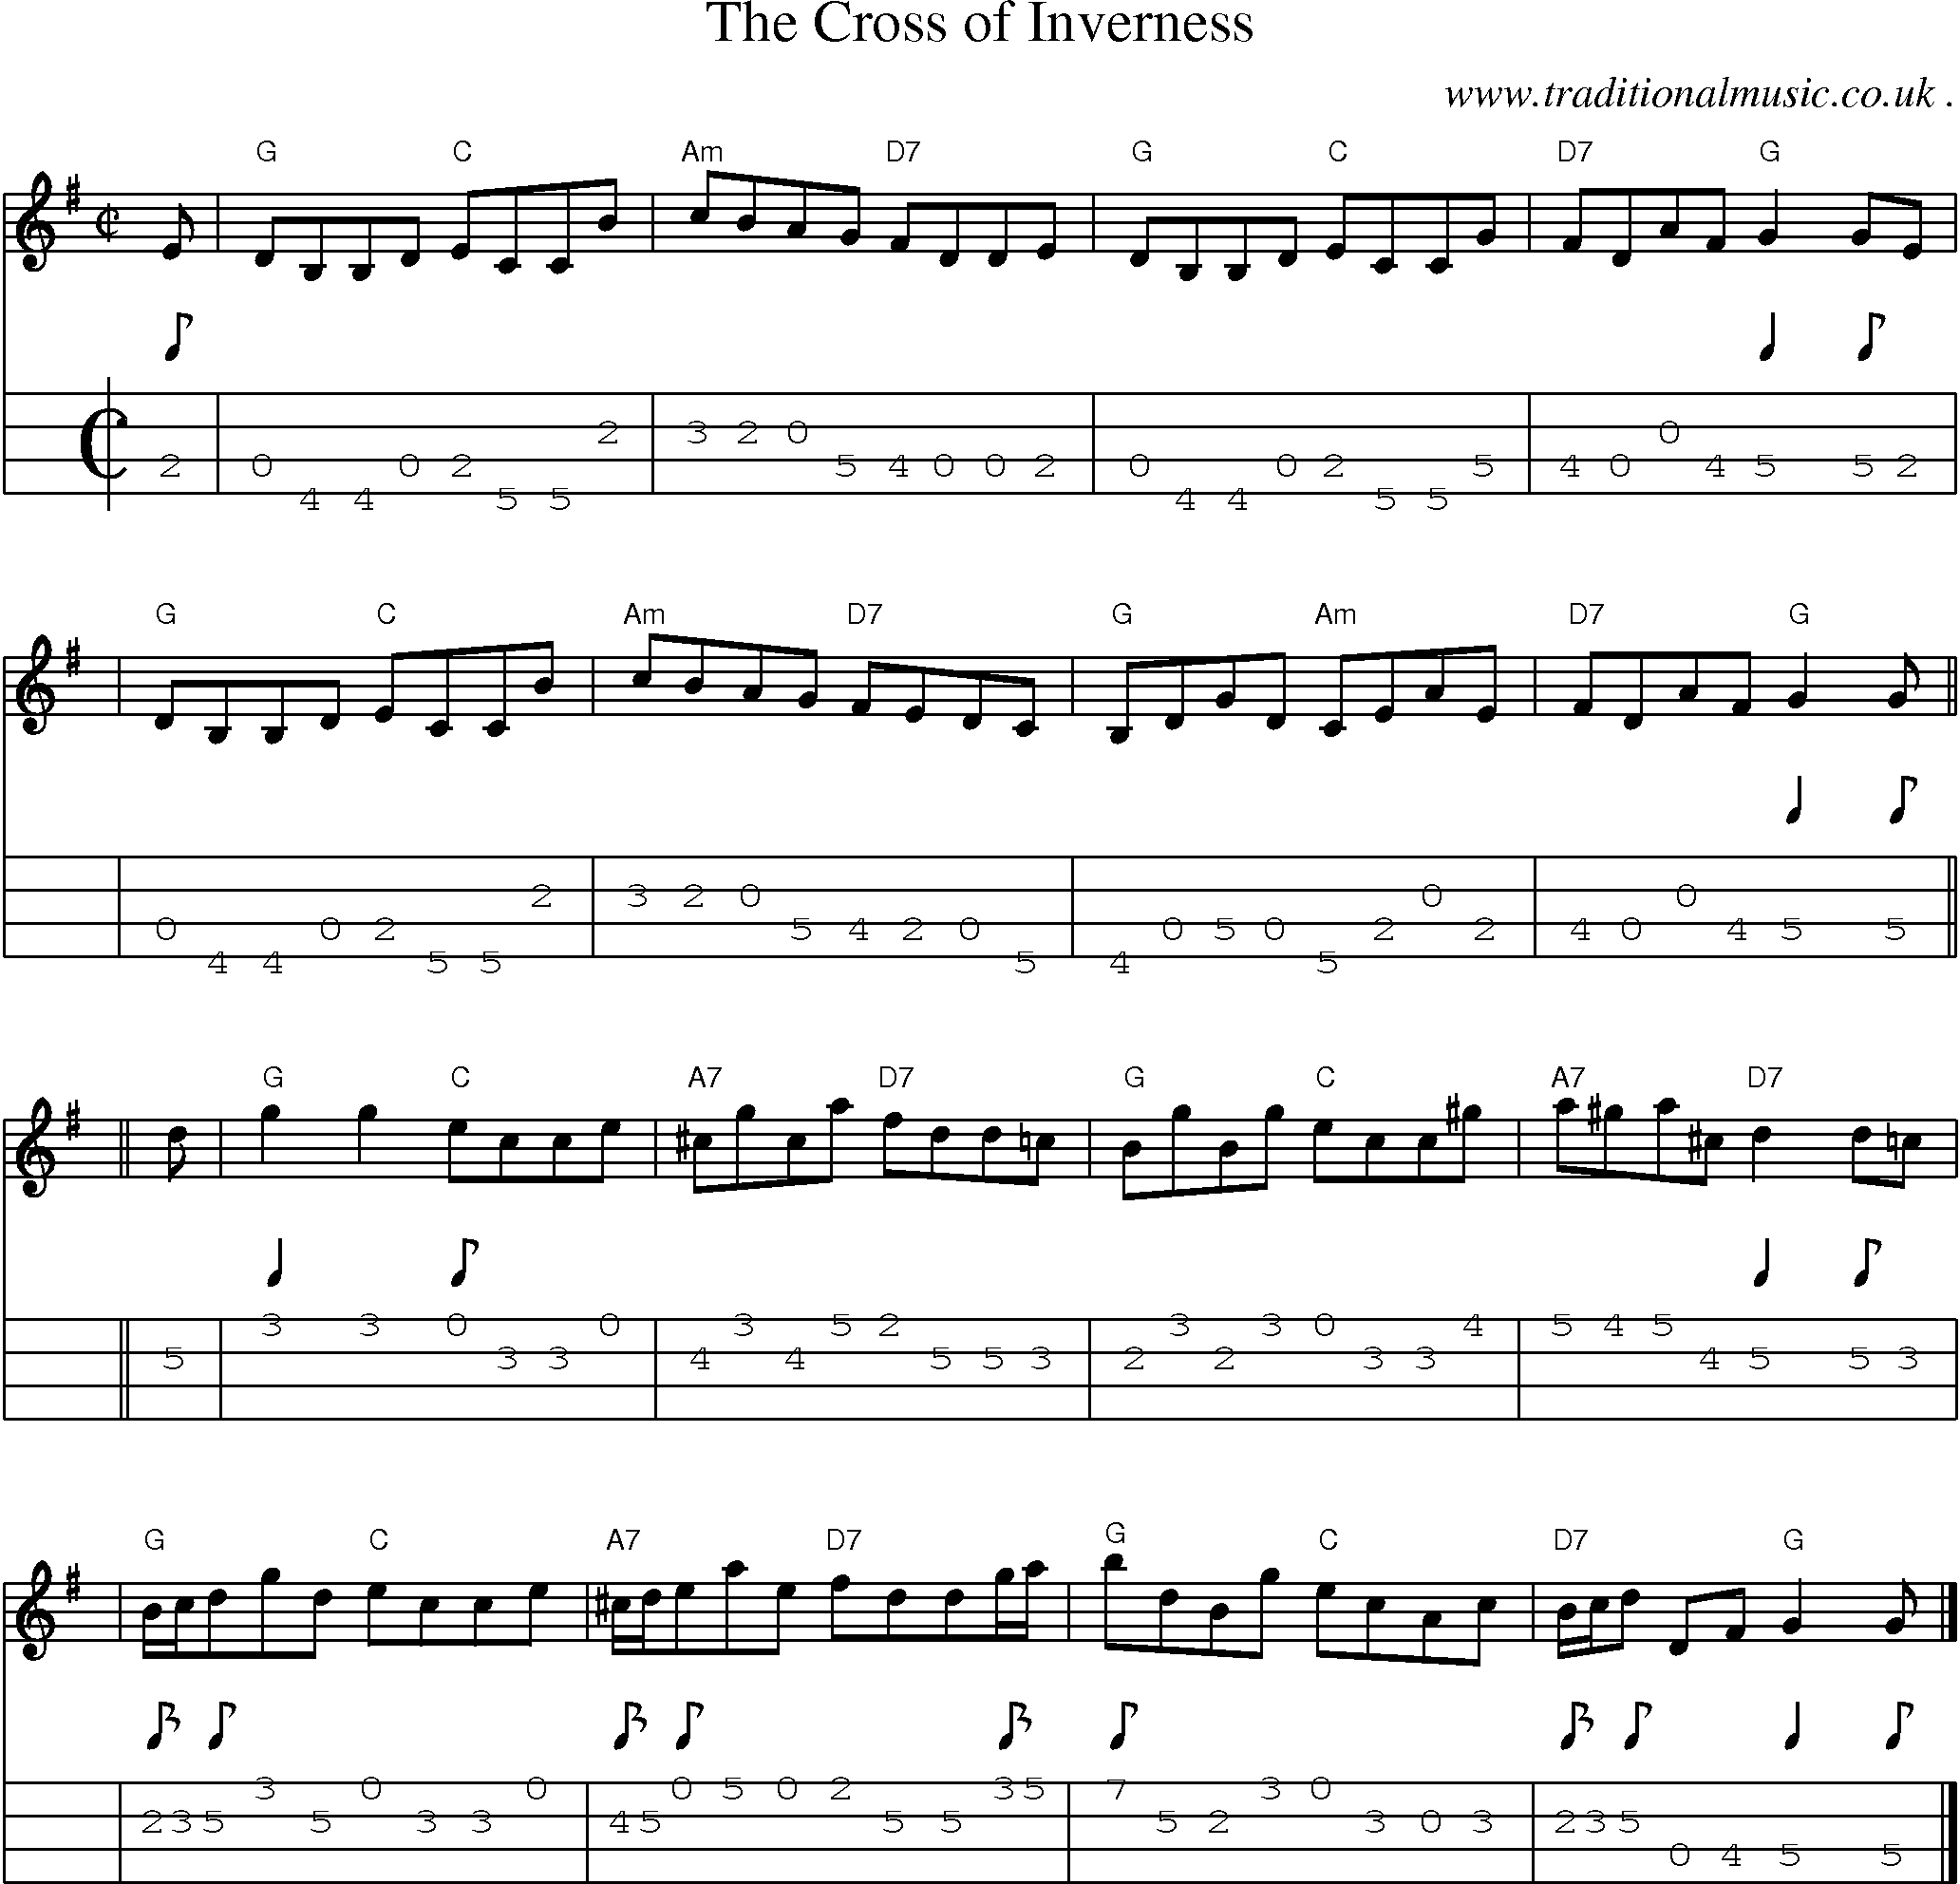 Sheet-music  score, Chords and Mandolin Tabs for The Cross Of Inverness